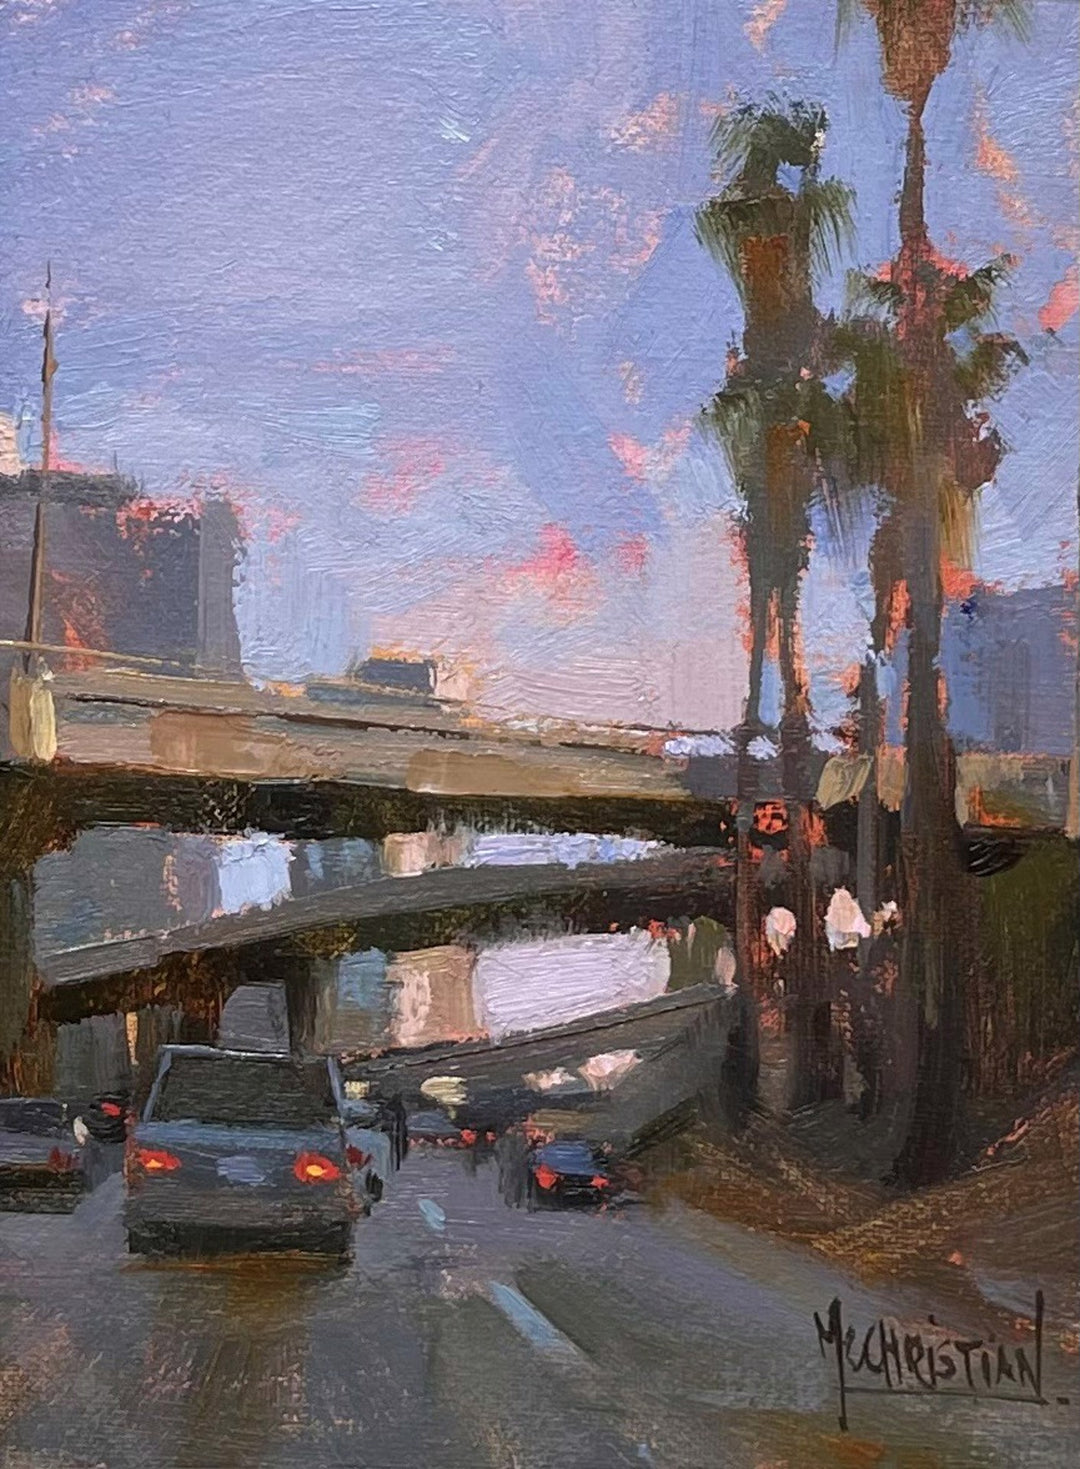 Jennifer McChristian's 2008 painting, "Under the 110, Jennifer McChristian", depicts cars driving on a highway at sunset.